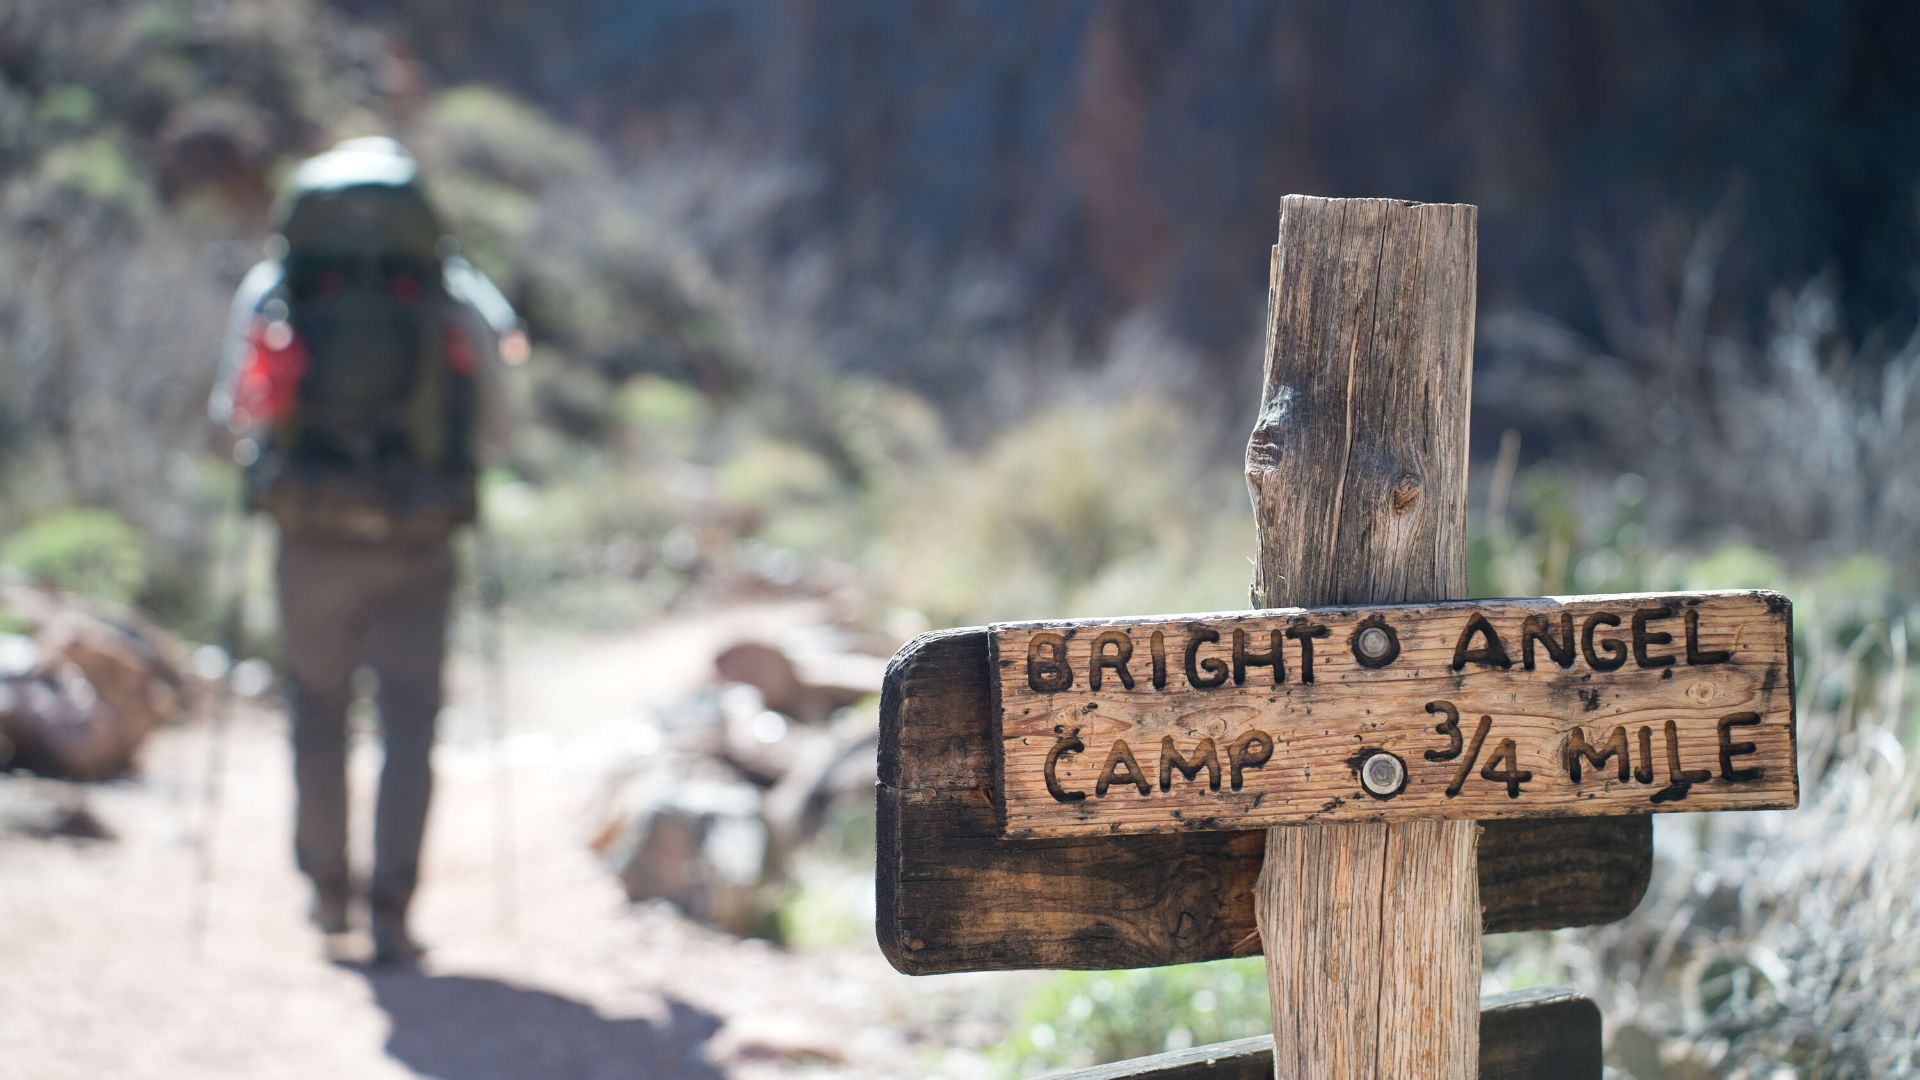 In the right foreground a wooden signpost reads "Bright Angel Campground," while a backpacker hikes past to the left